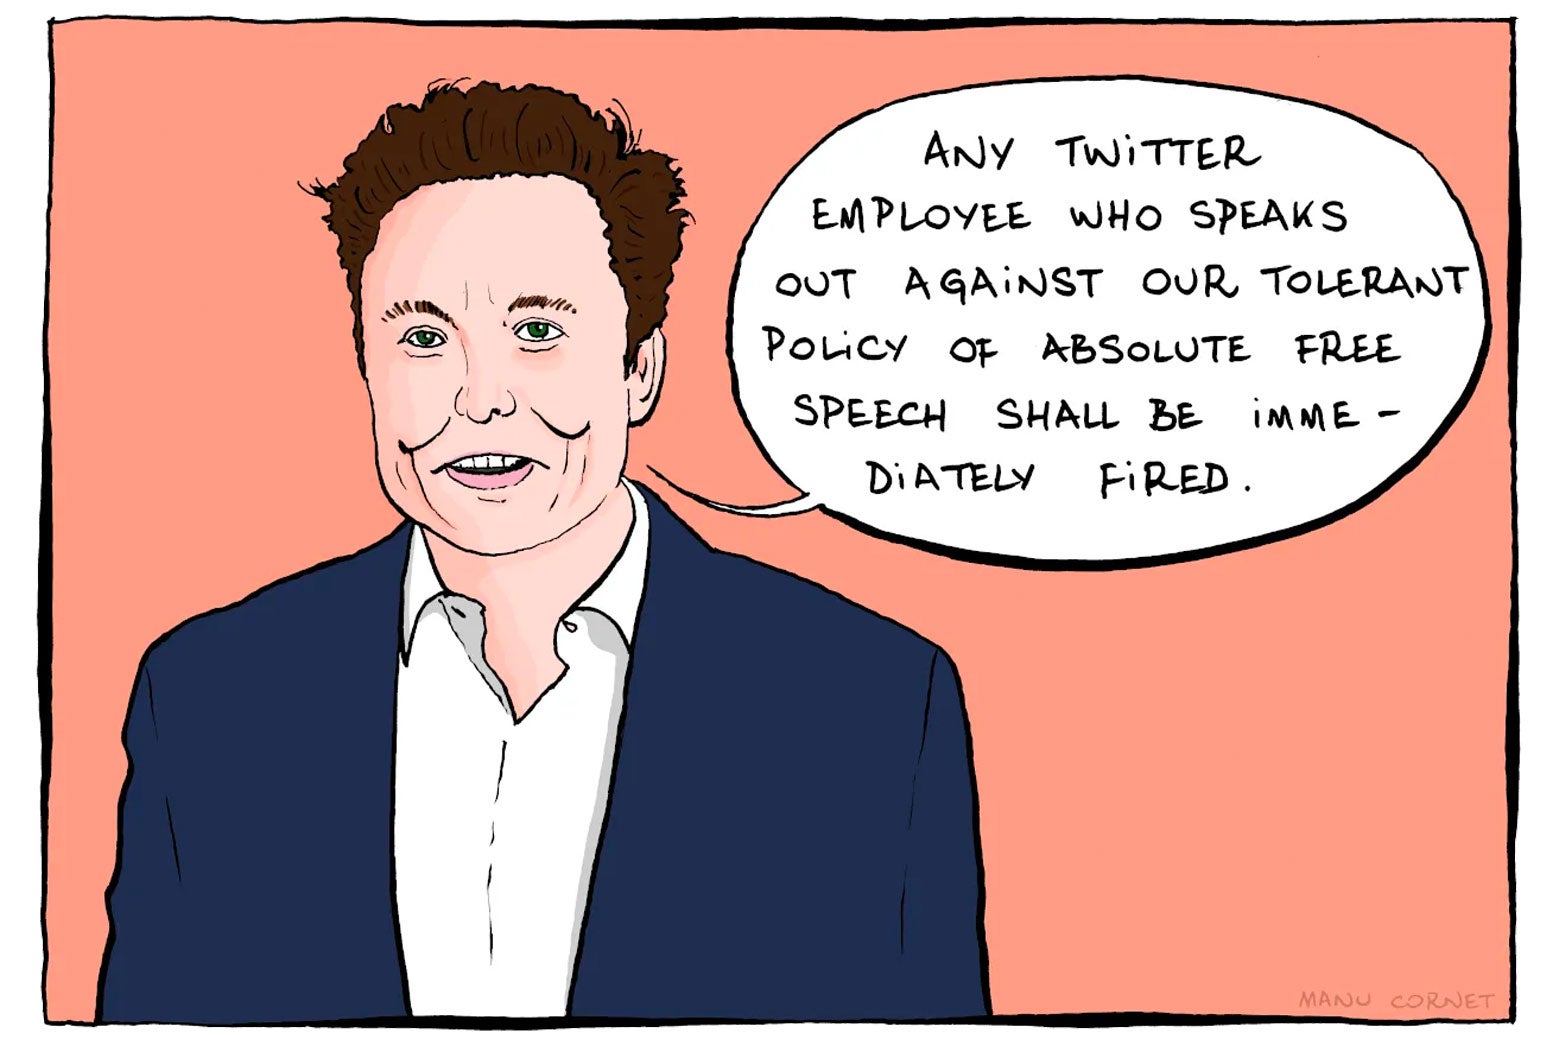 Cartoon Elon Musk lays out a chilling choice for Twitter workers.